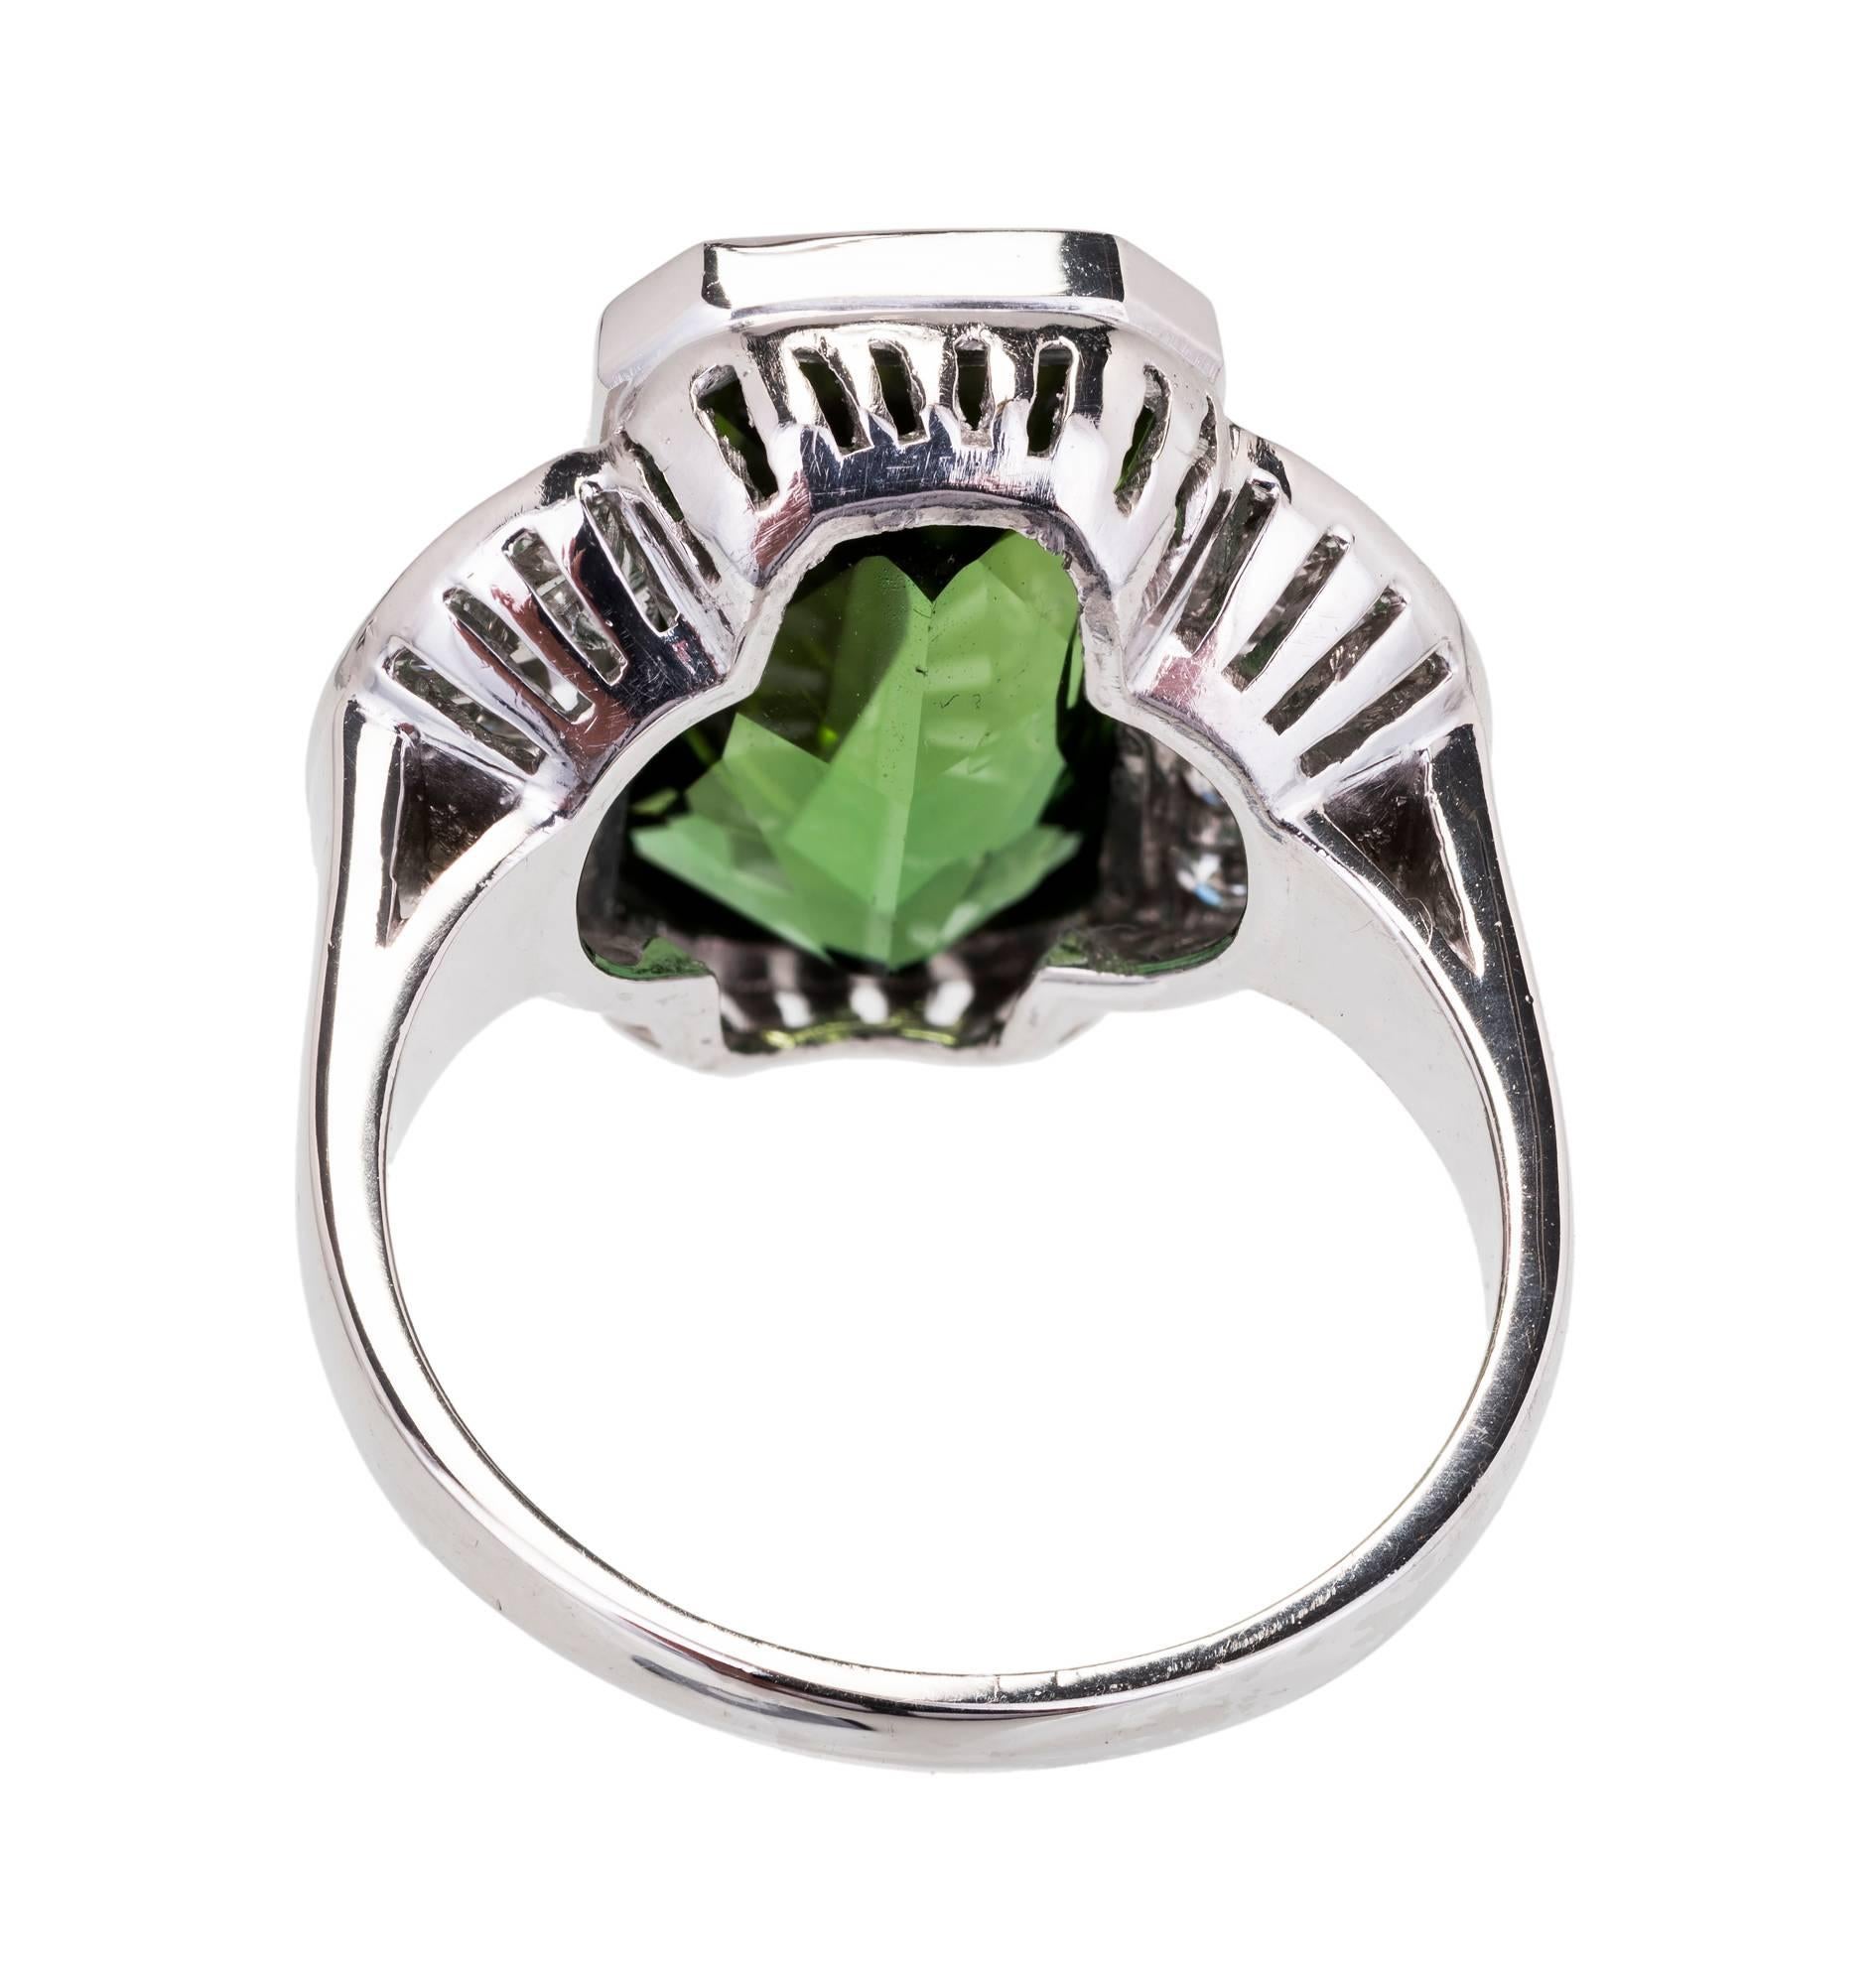 7.46 Carat Green Tourmaline Pavé Diamond Platinum Cocktail Ring In Good Condition For Sale In Stamford, CT